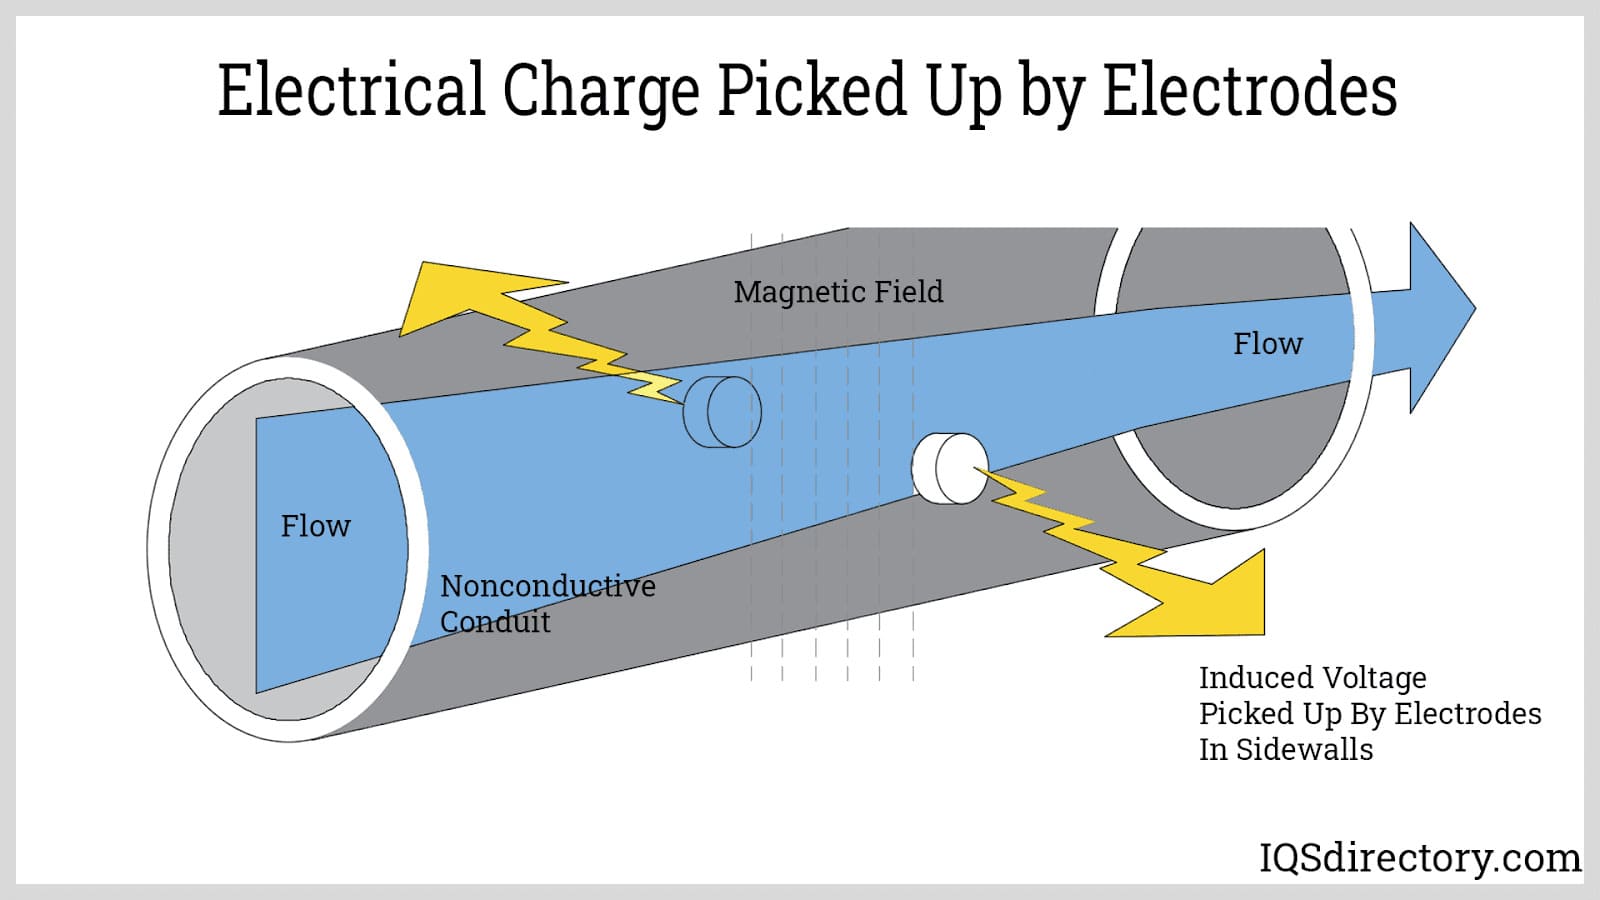 Electrical Charge Picked up by Electrodes